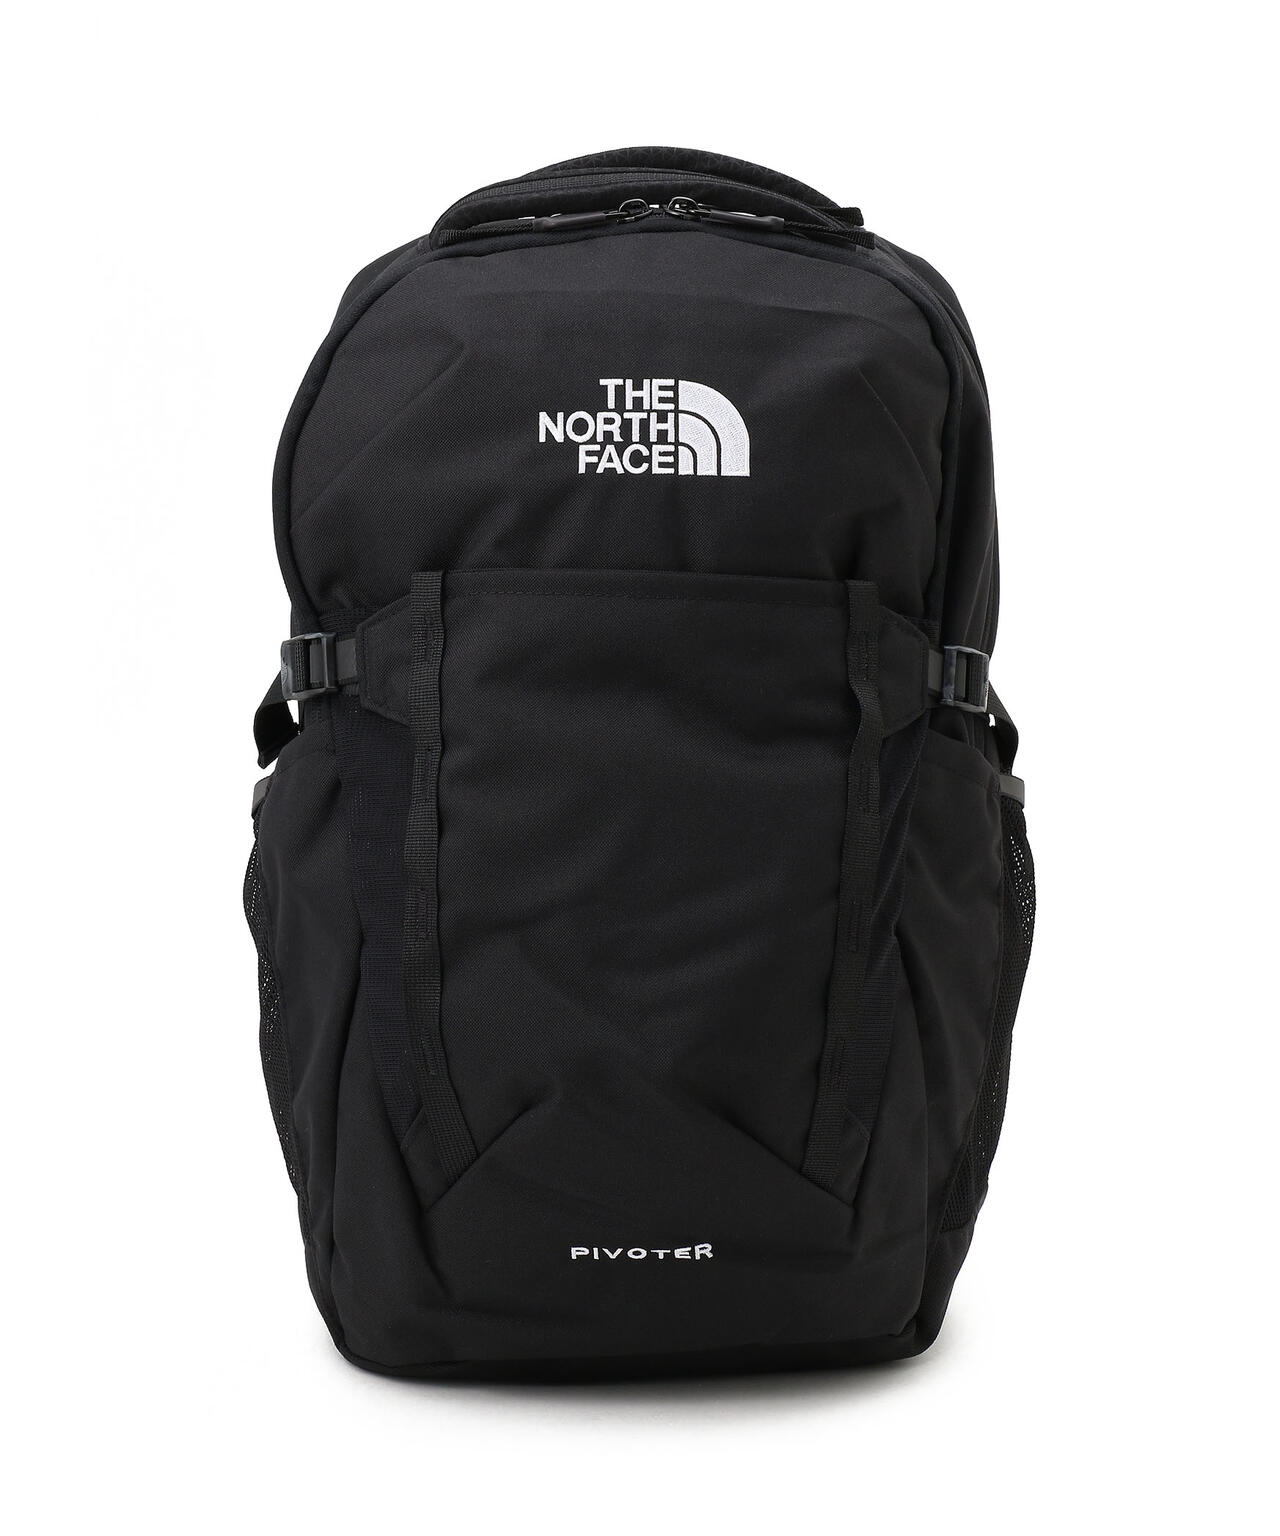 THE NORTH FACE ★リュック★PIVOTER